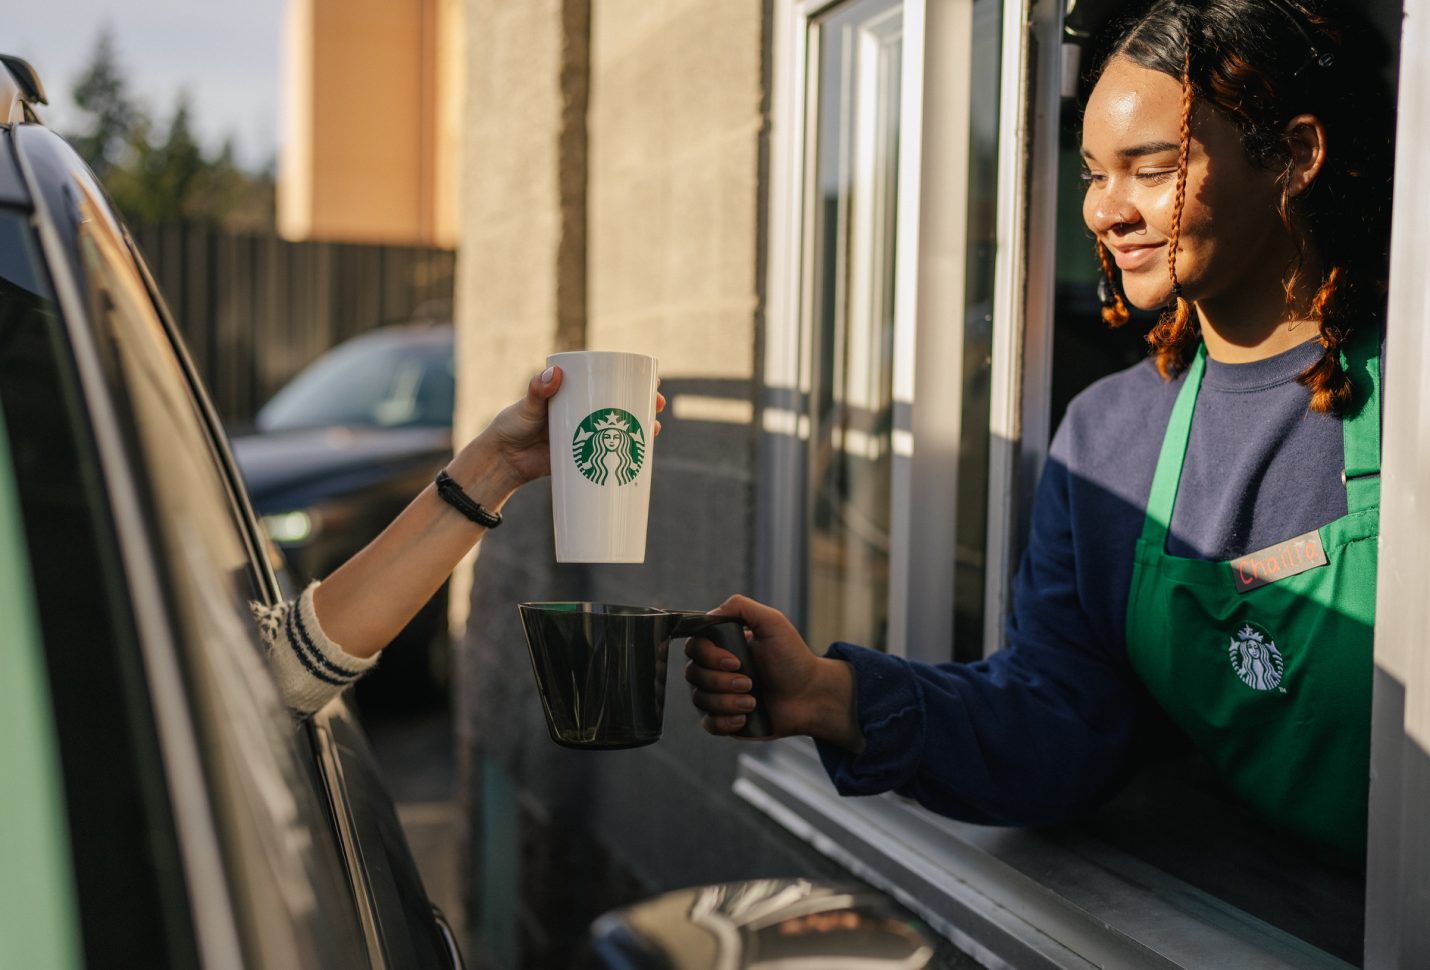 Starbucks customers can now re-fill their cups to cut waste